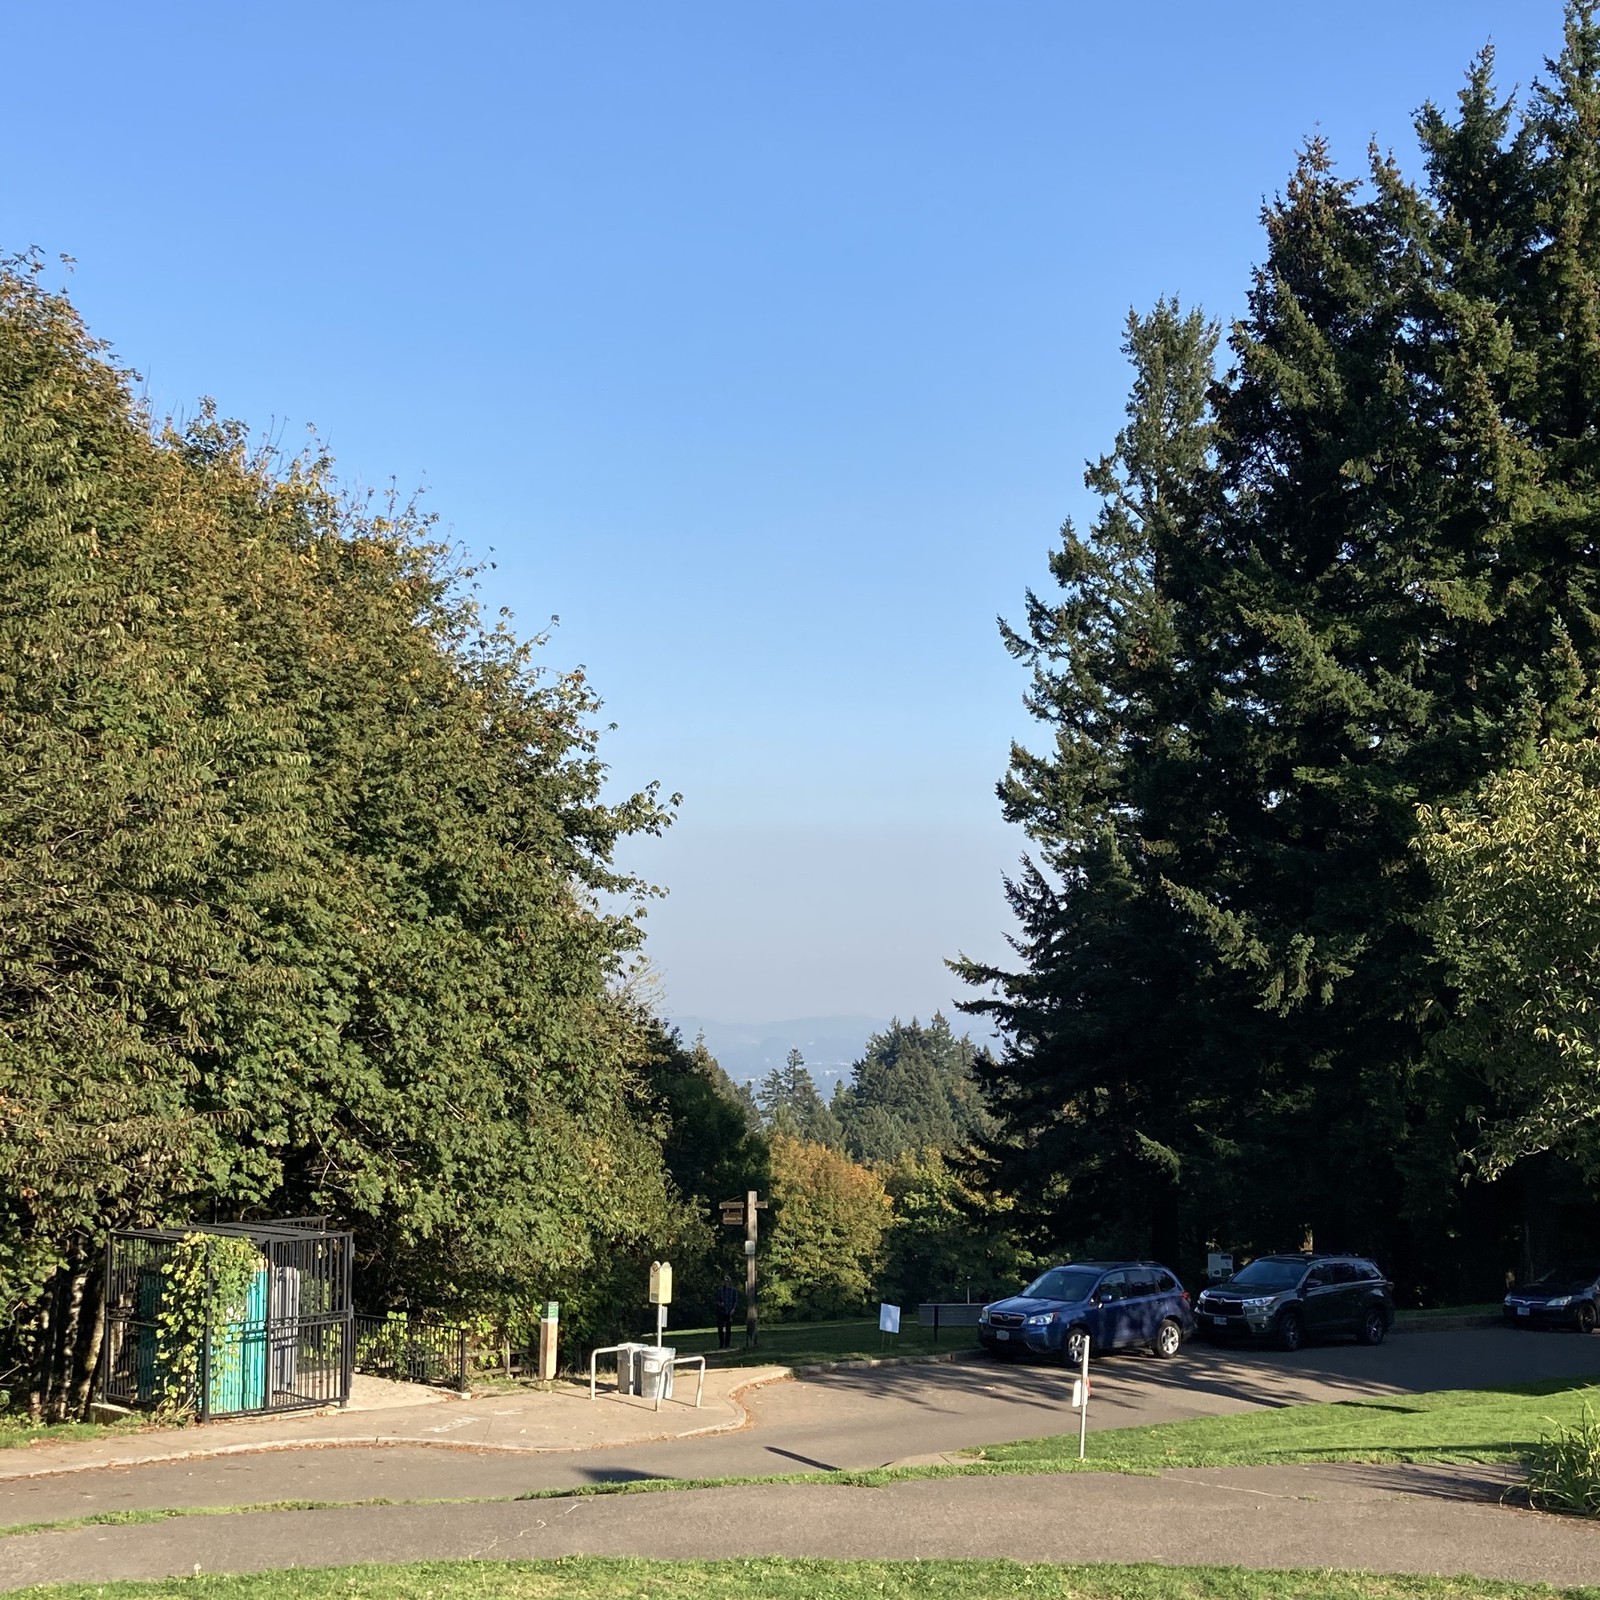 View from Council Crest toward Mt. Hood, which is NOT visible